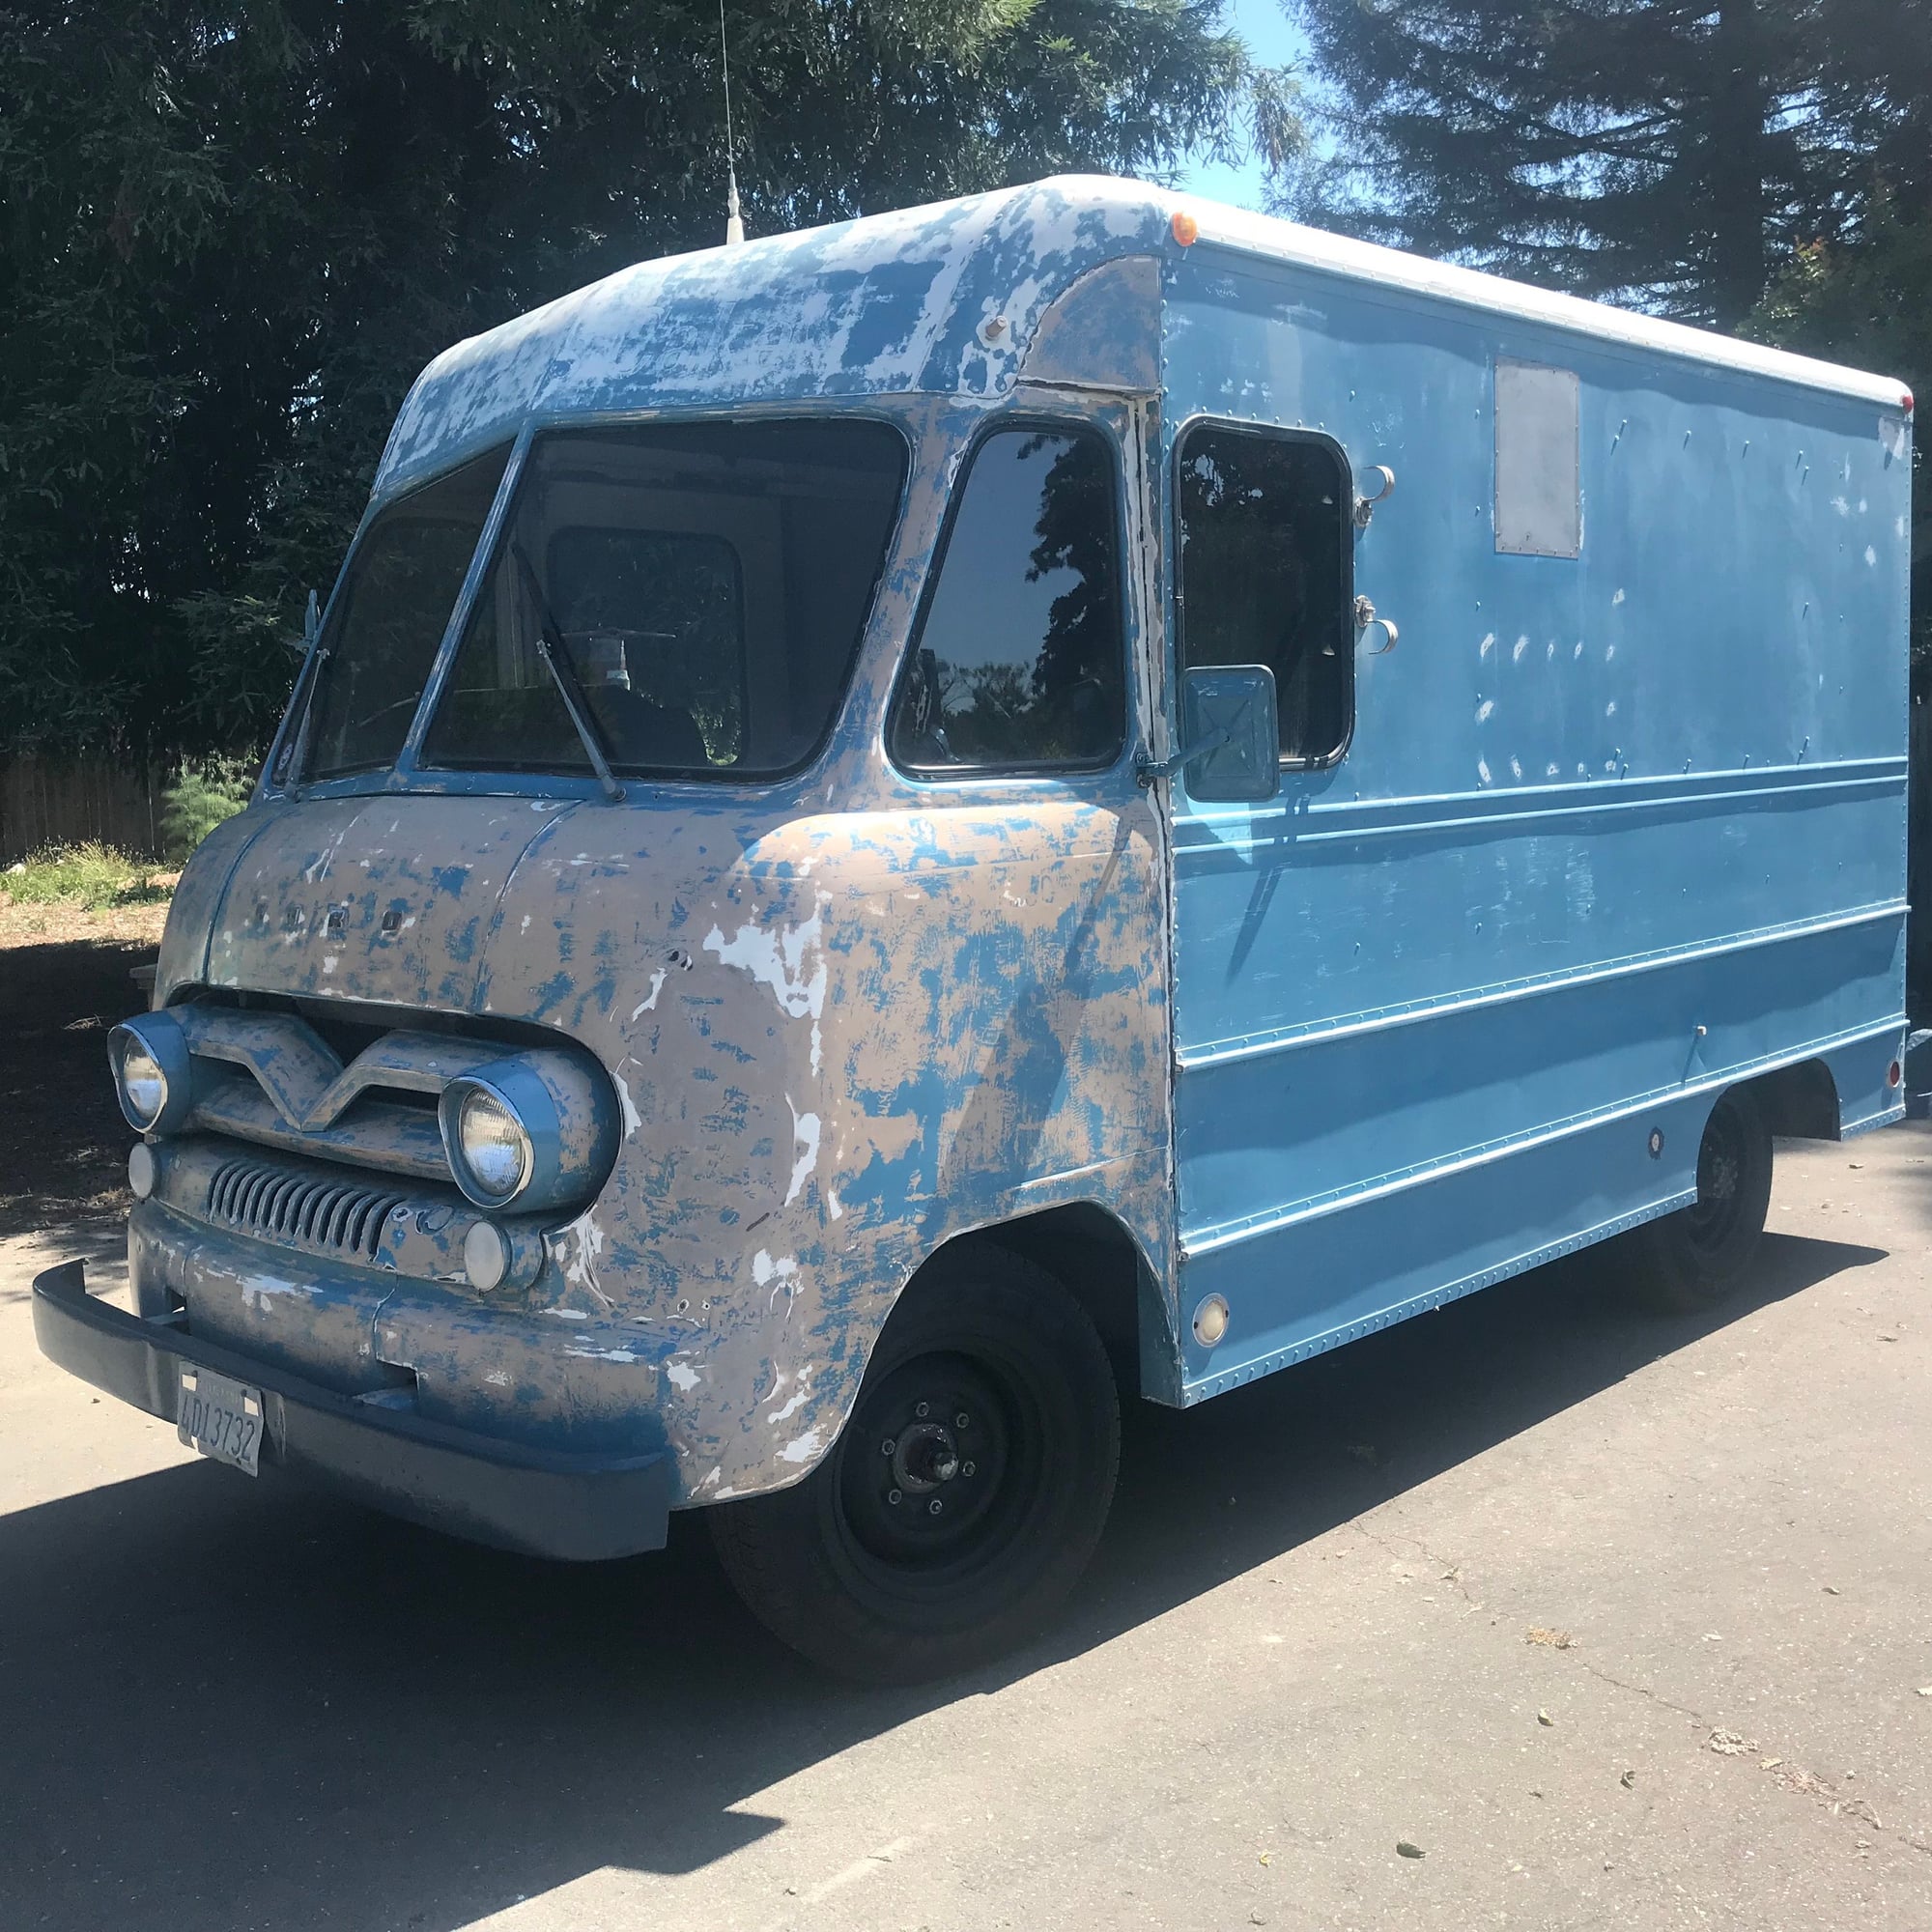 1962 Ford P-350 - Vintage Hostess Cake Bread Truck +Road Ready+ - Used - VIN p35jh308855 - 6 cyl - 2WD - Manual - Truck - Blue - Santa Rosa, CA 95404, United States